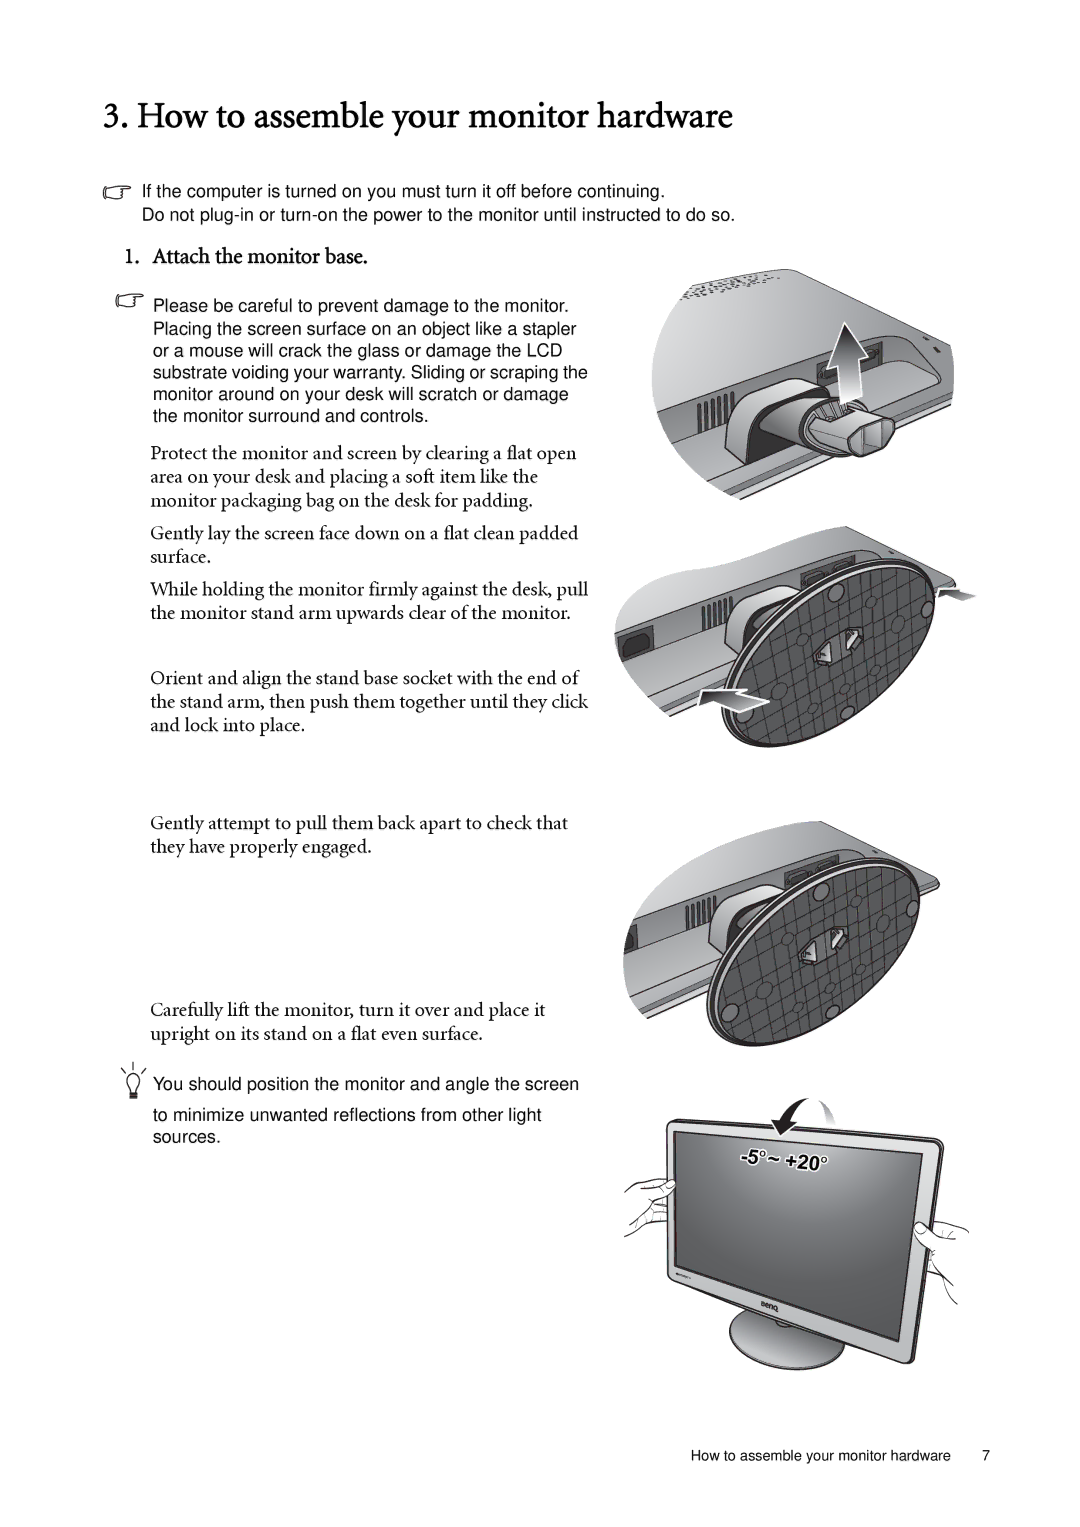 BenQ GL940A, GL941A, GL2040A, GL2440, GL2240A user manual How to assemble your monitor hardware, Attach the monitor base 